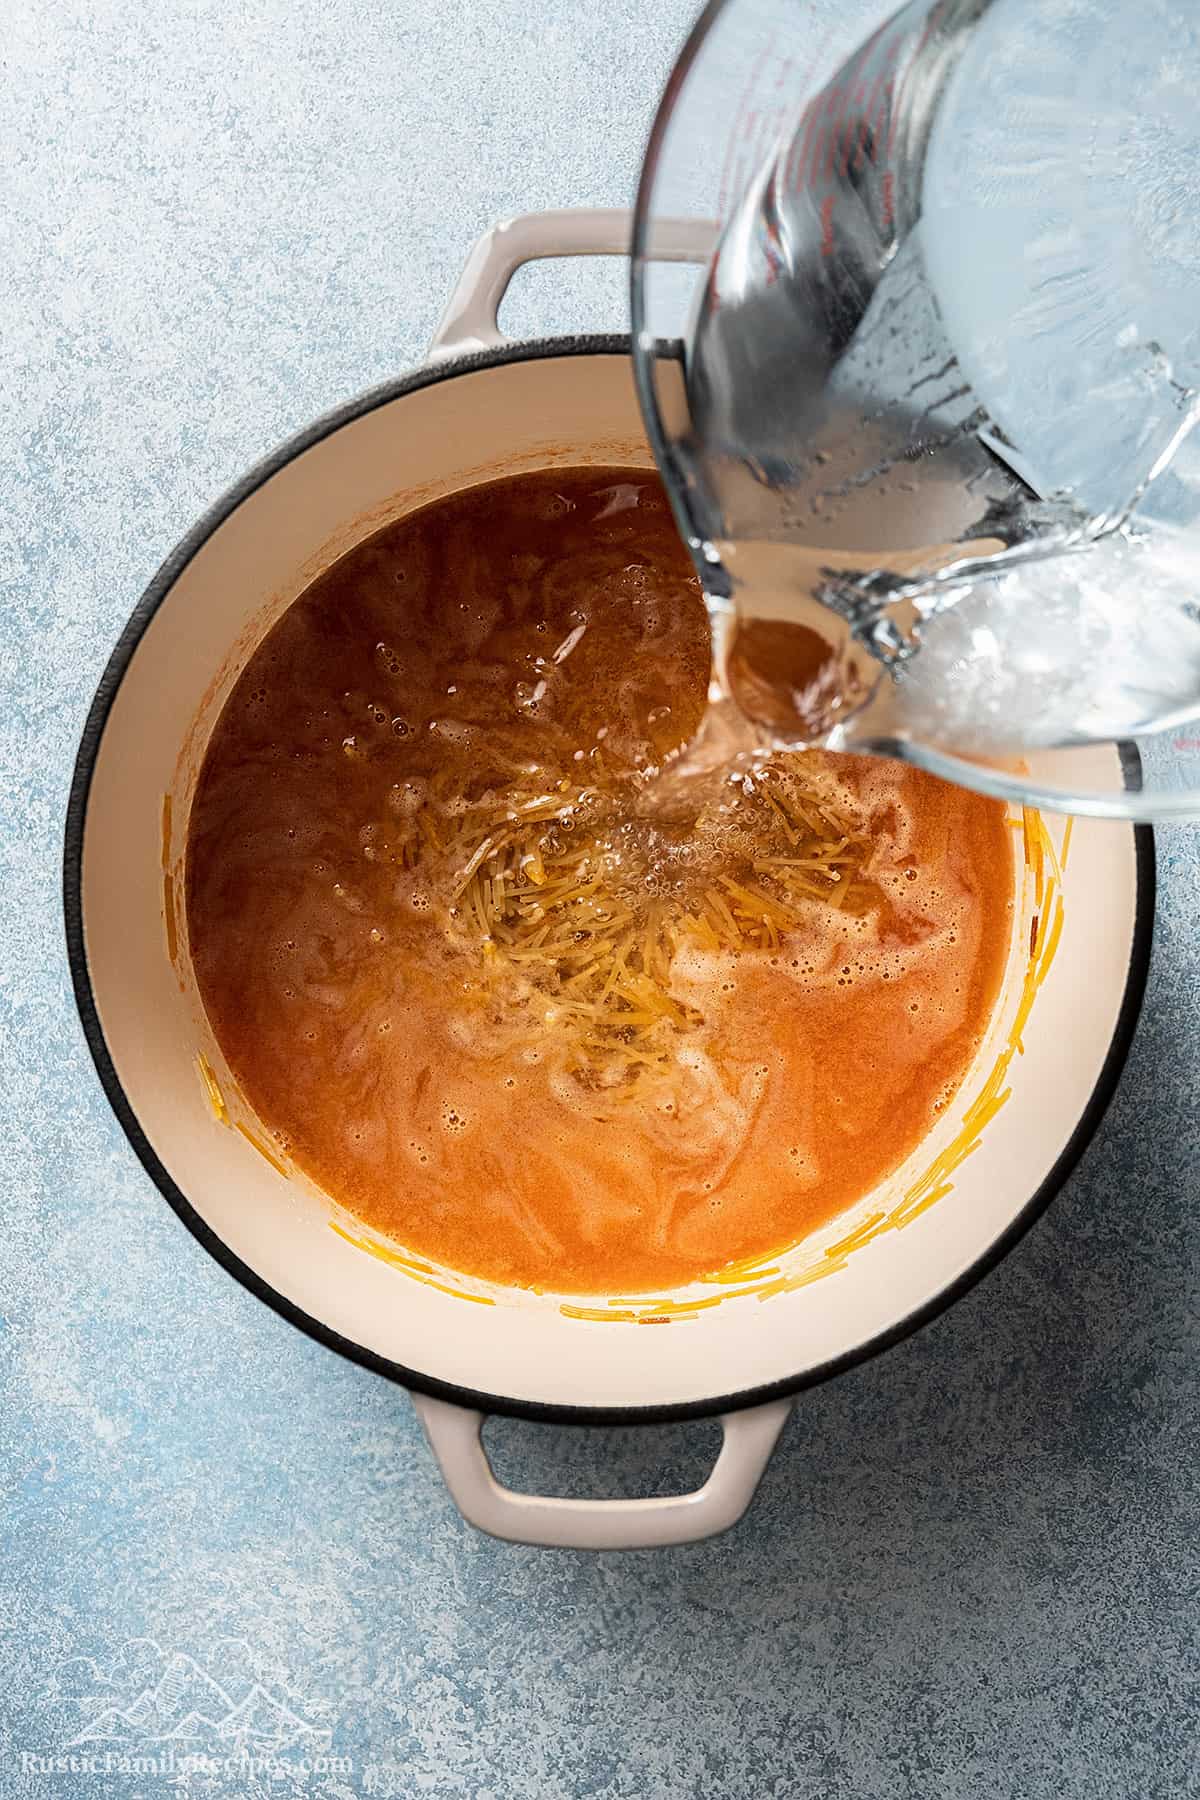 Adding water to a pot with tomato broth and fideos